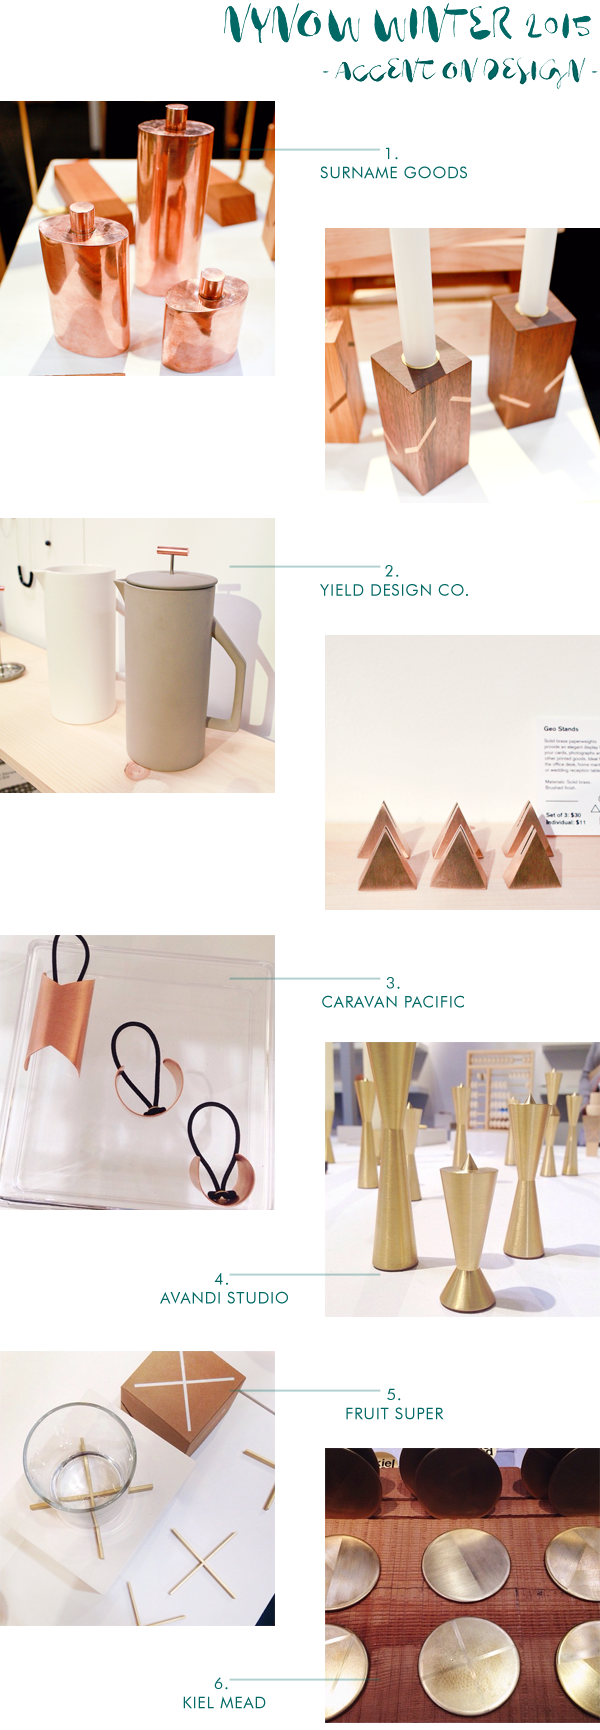 NYNOW Winter 2015 Highlights from Accent on Design by Oh So Beautiful Paper